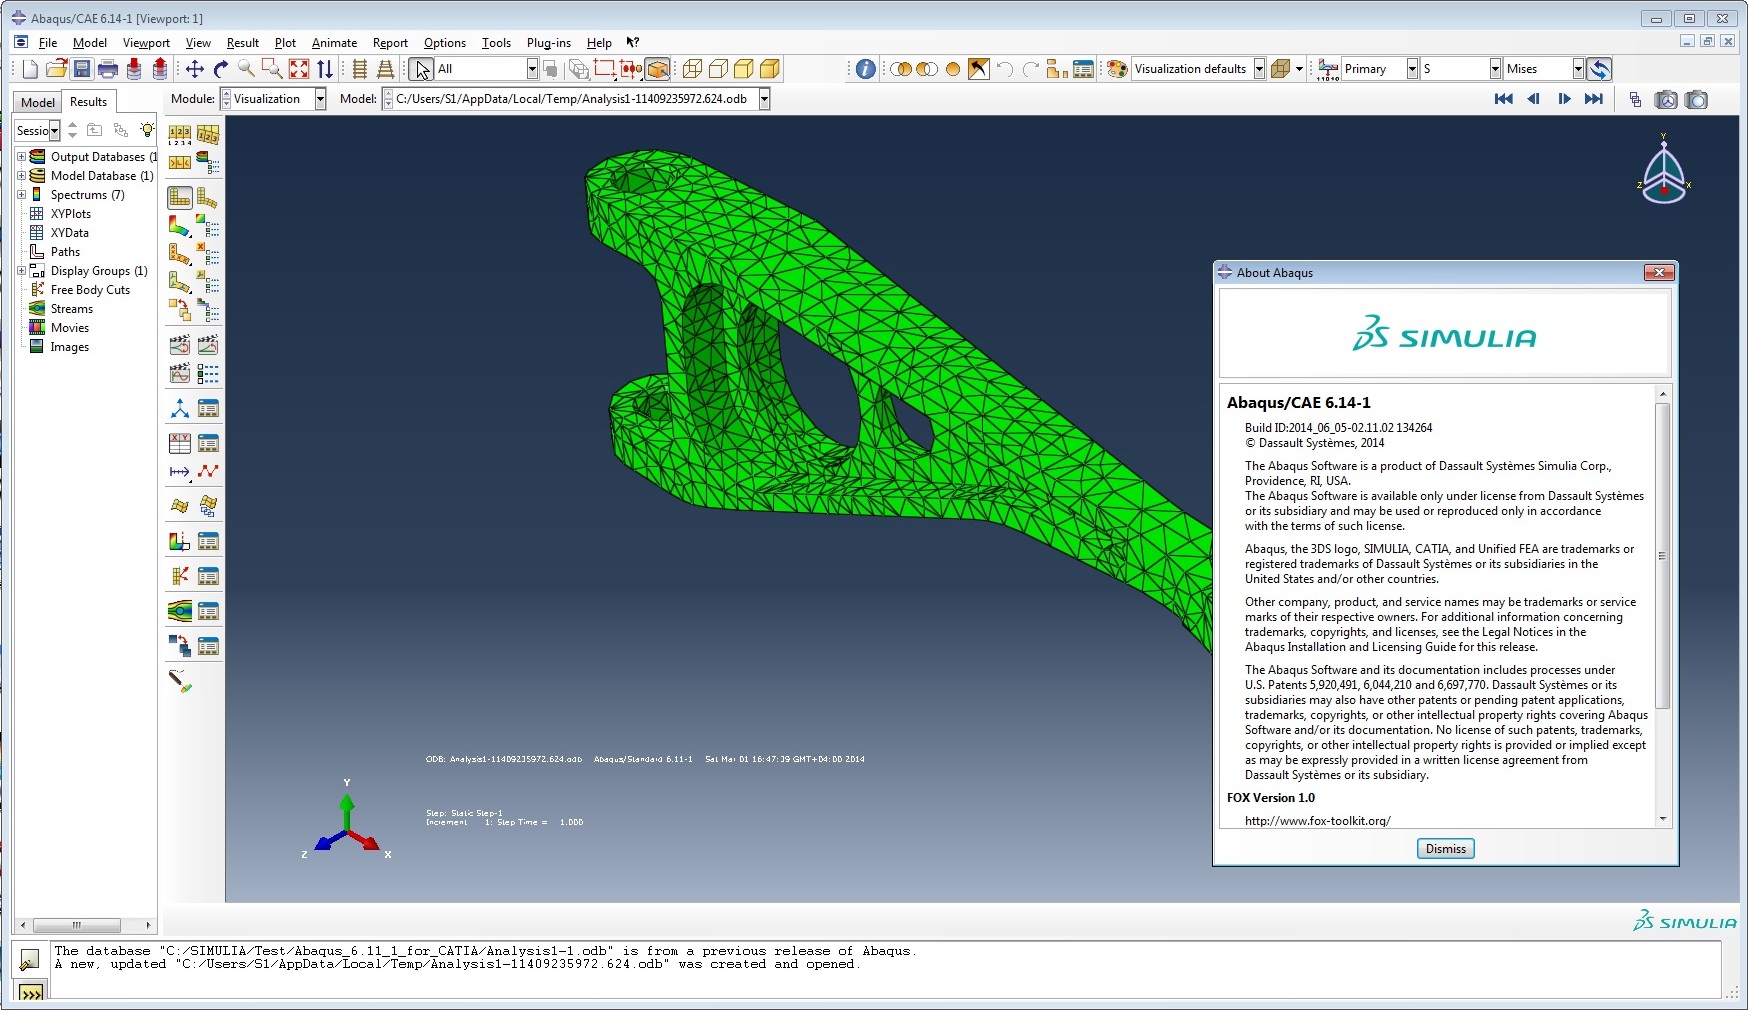 how to install abaqus 6.14 student version